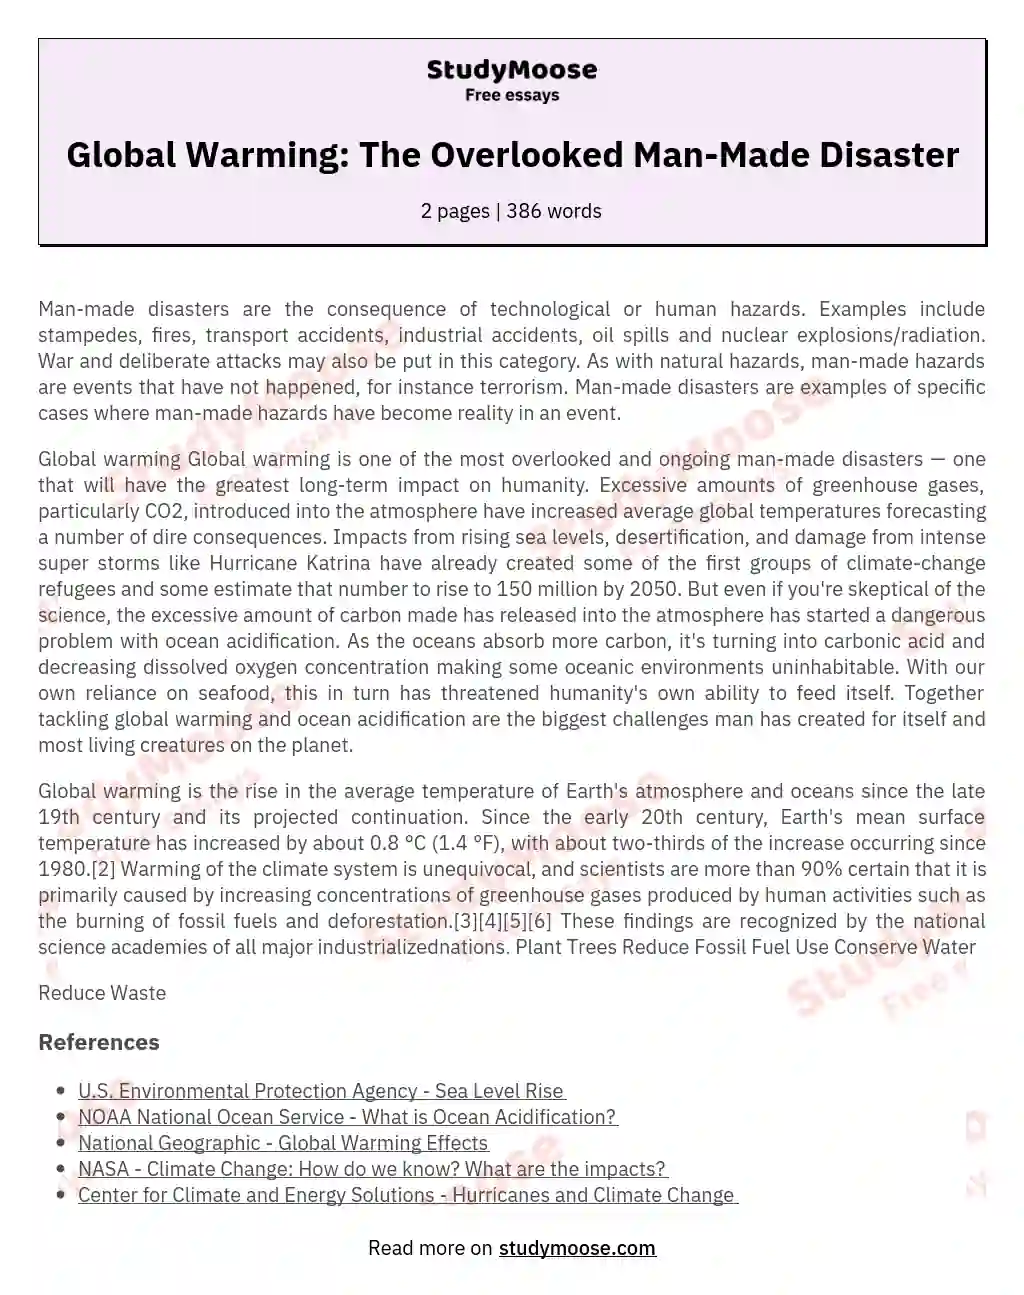 Global Warming: The Overlooked Man-Made Disaster essay